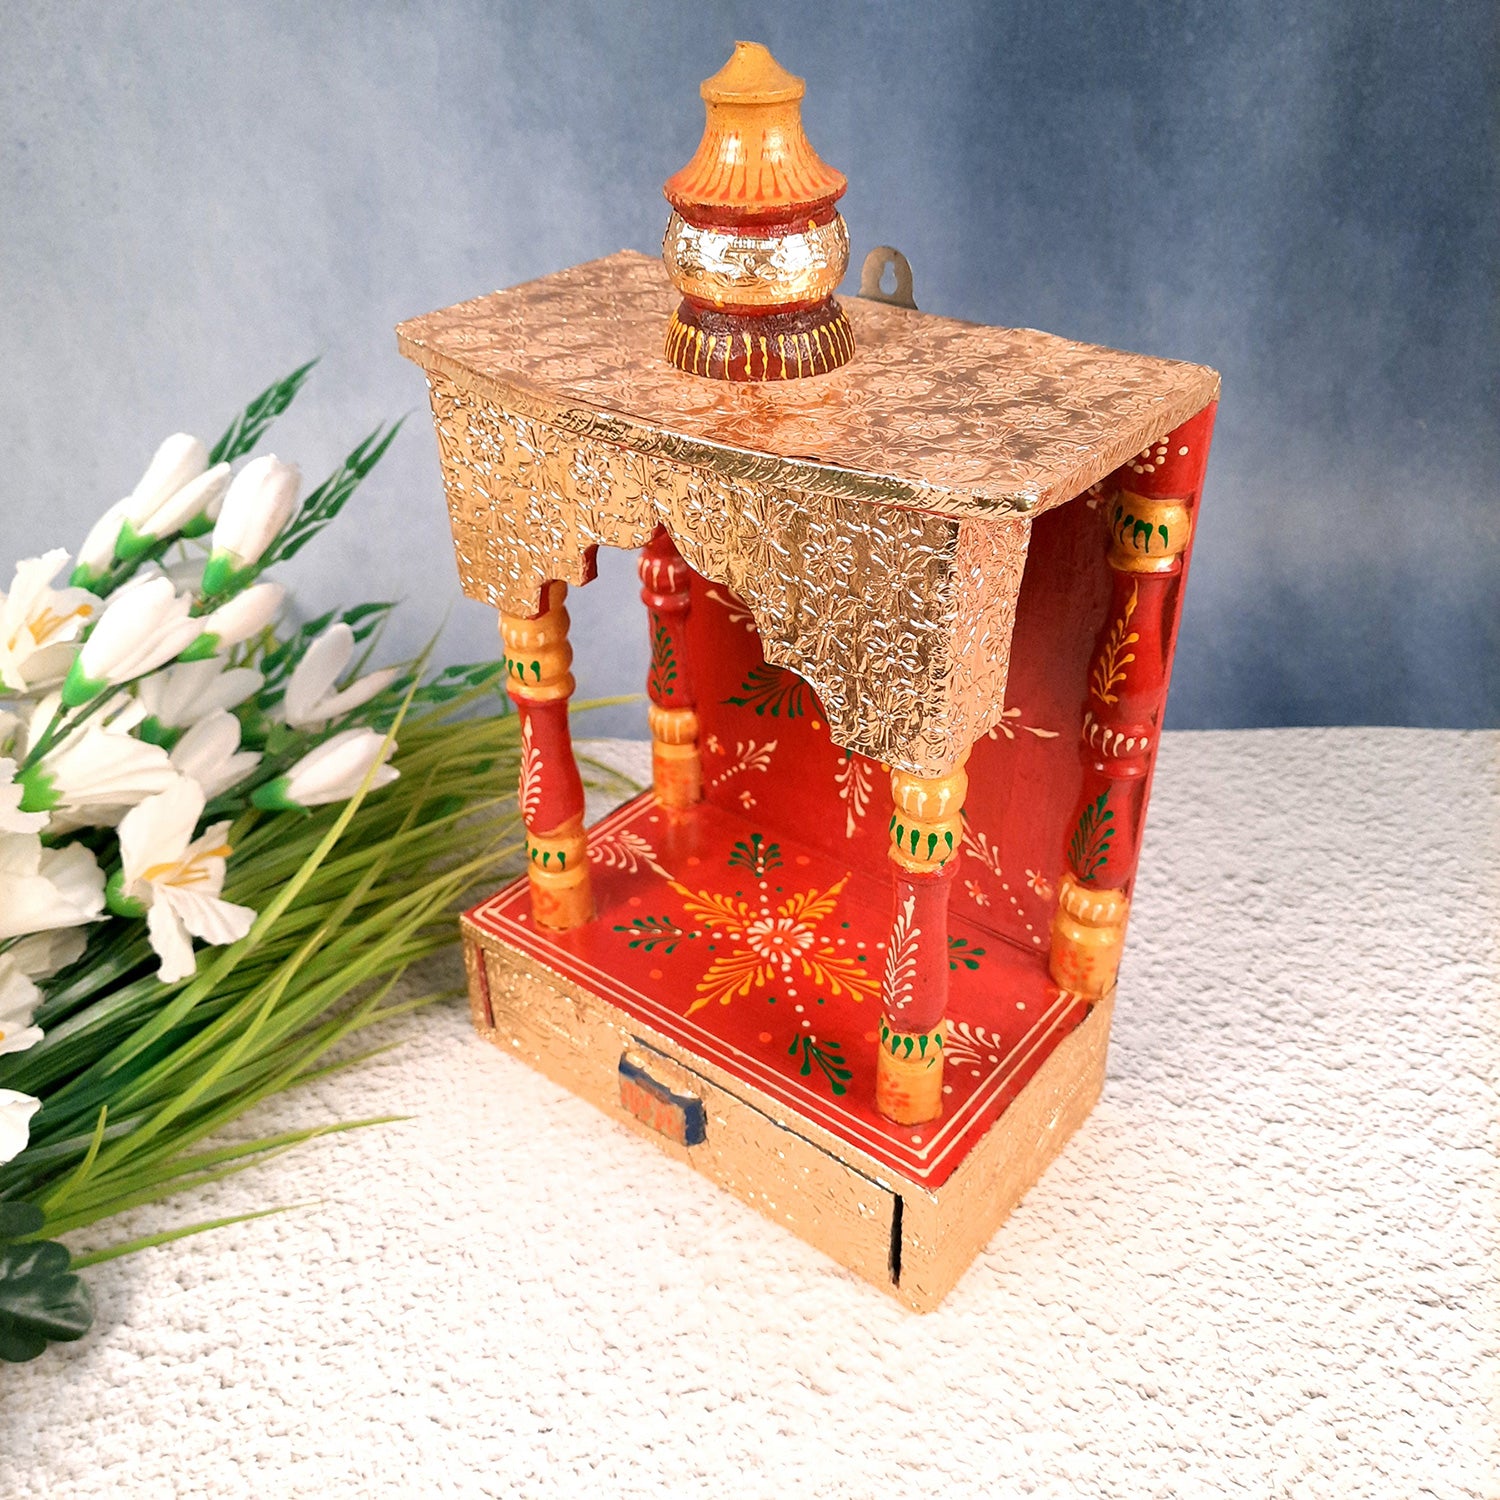 Pooja Temple - Wall Mounted Pooja with Shelf - 15 inch - ApkaMart #Style_Style 2